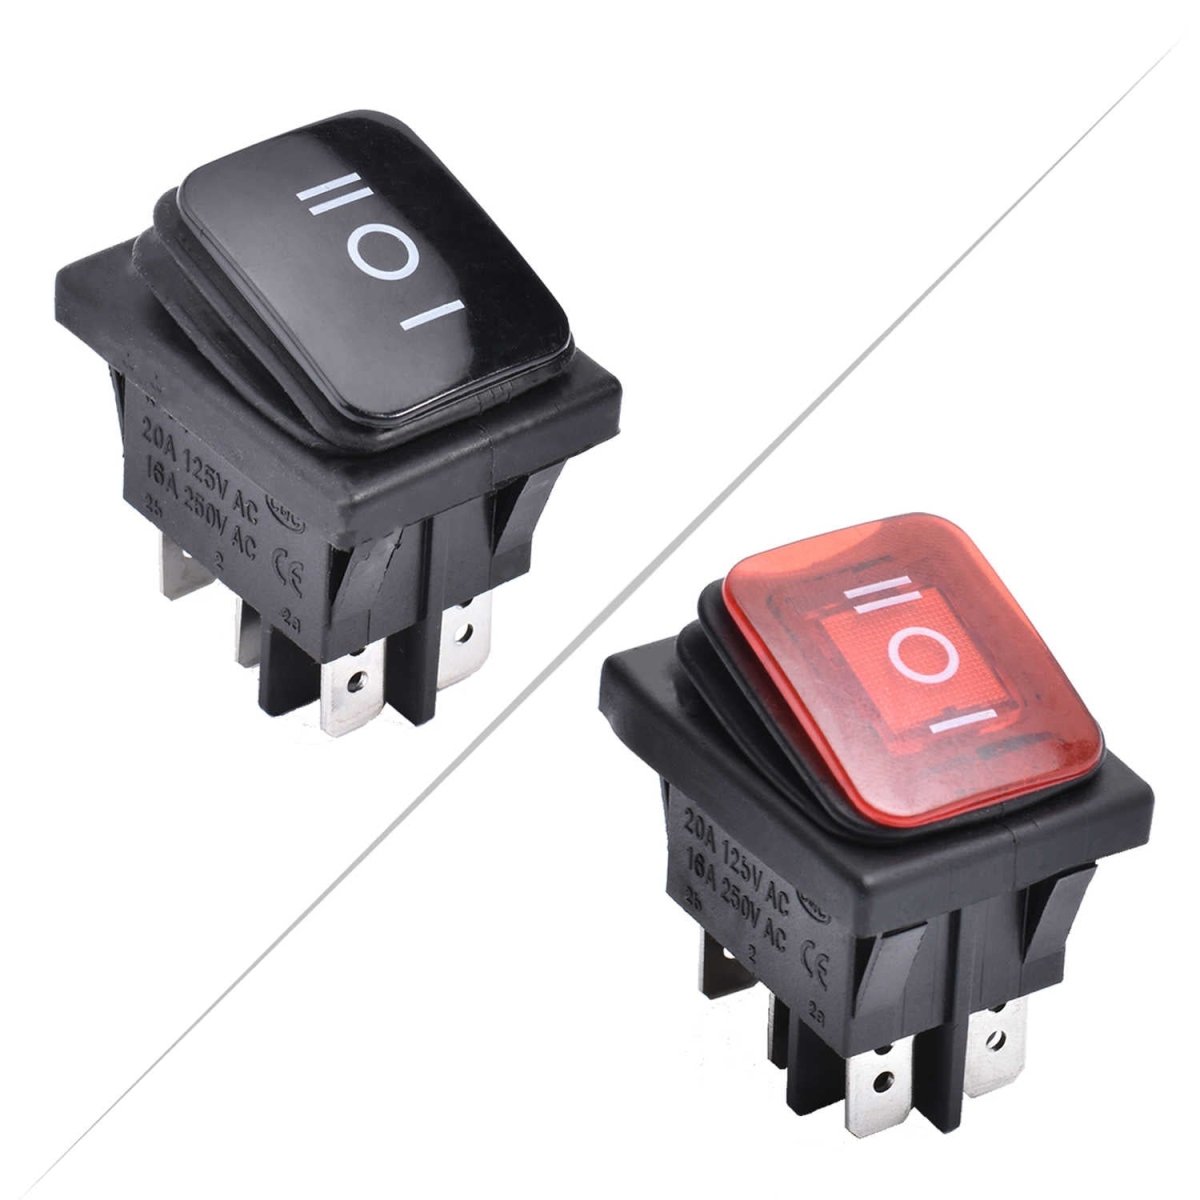 6 Pins 3 Position Rocker Toggle Switch 2Pcs Boat Waterproof AC 125V/20A 250V/16A ON-Off-ON DPST KCD4-203N (Black Red) - Black-